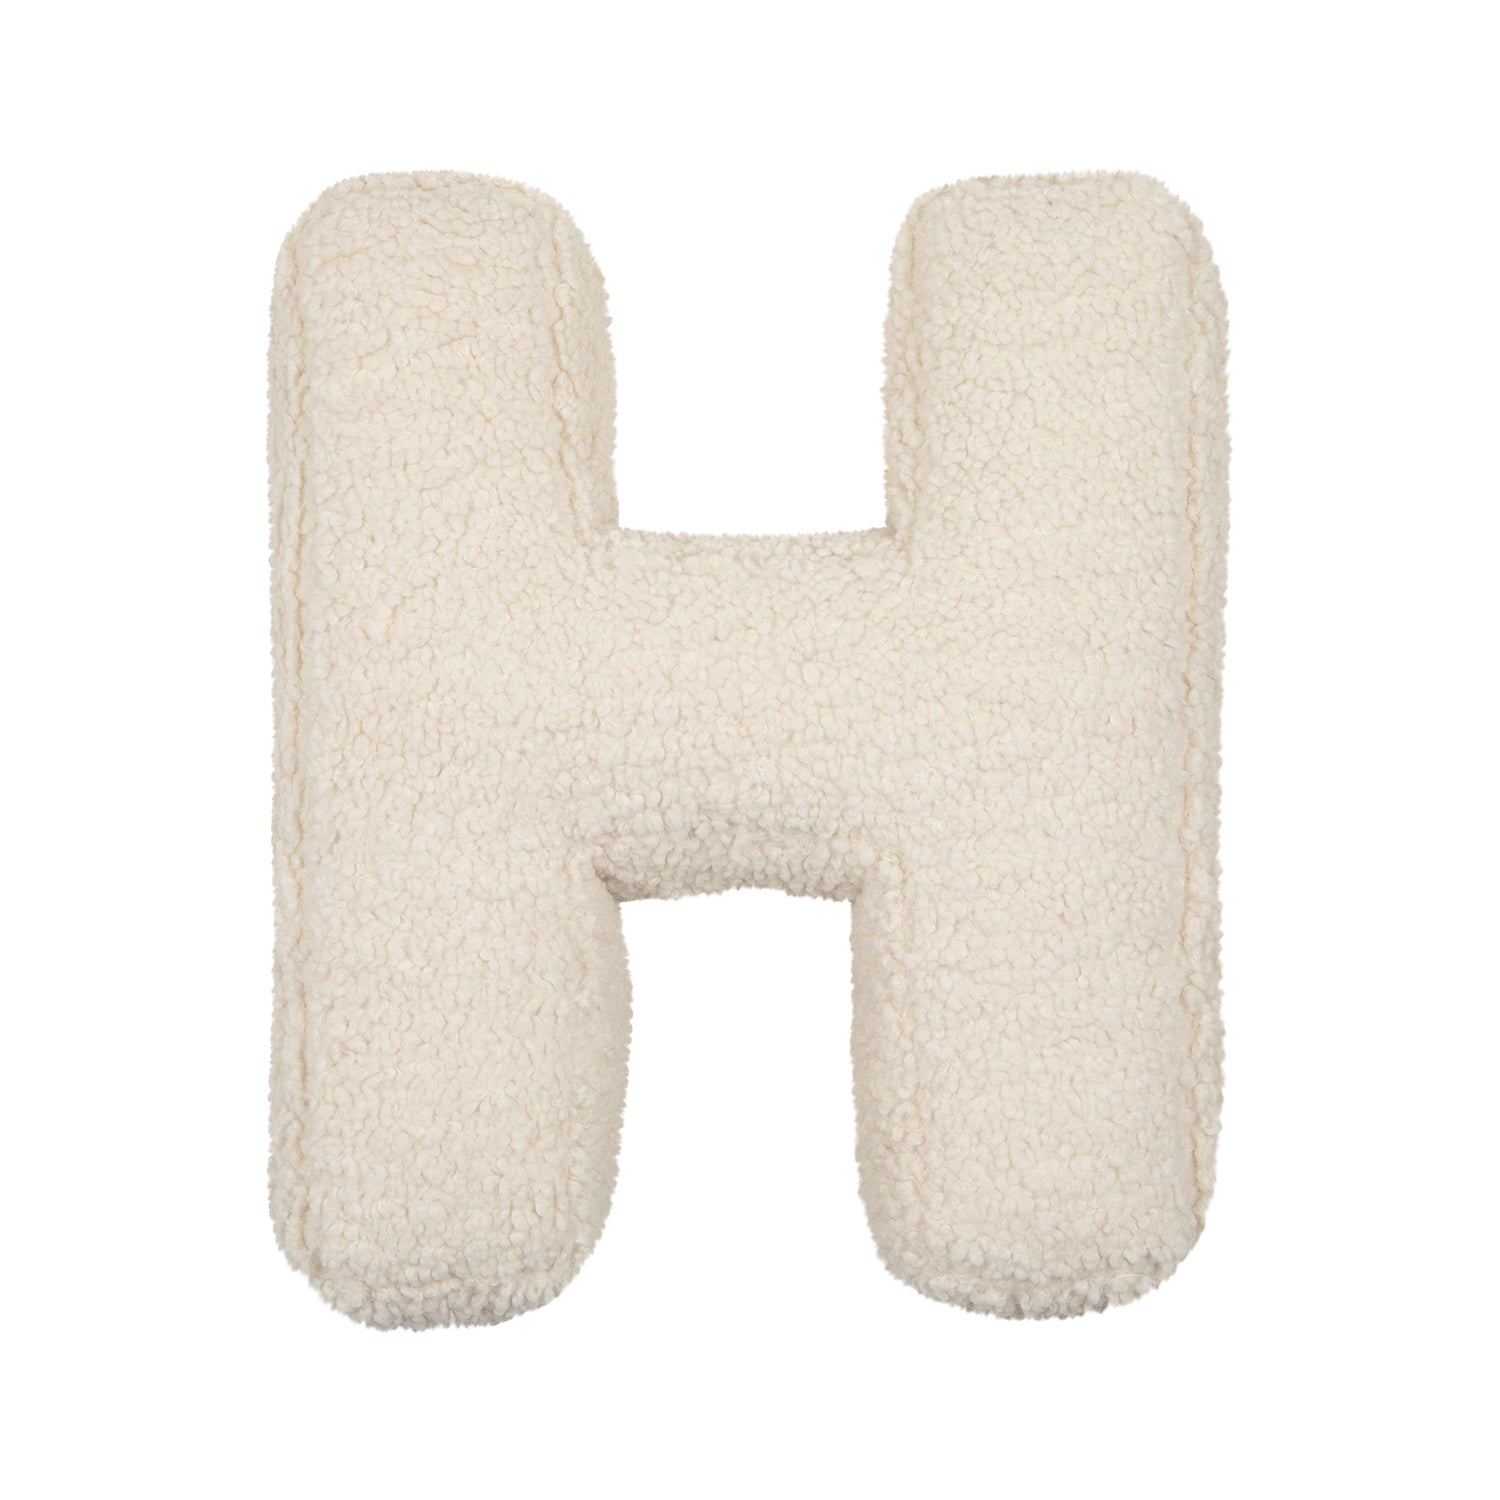 Boucle letter cushion H teddy letter pillow by bettys home on white background kids gift idea